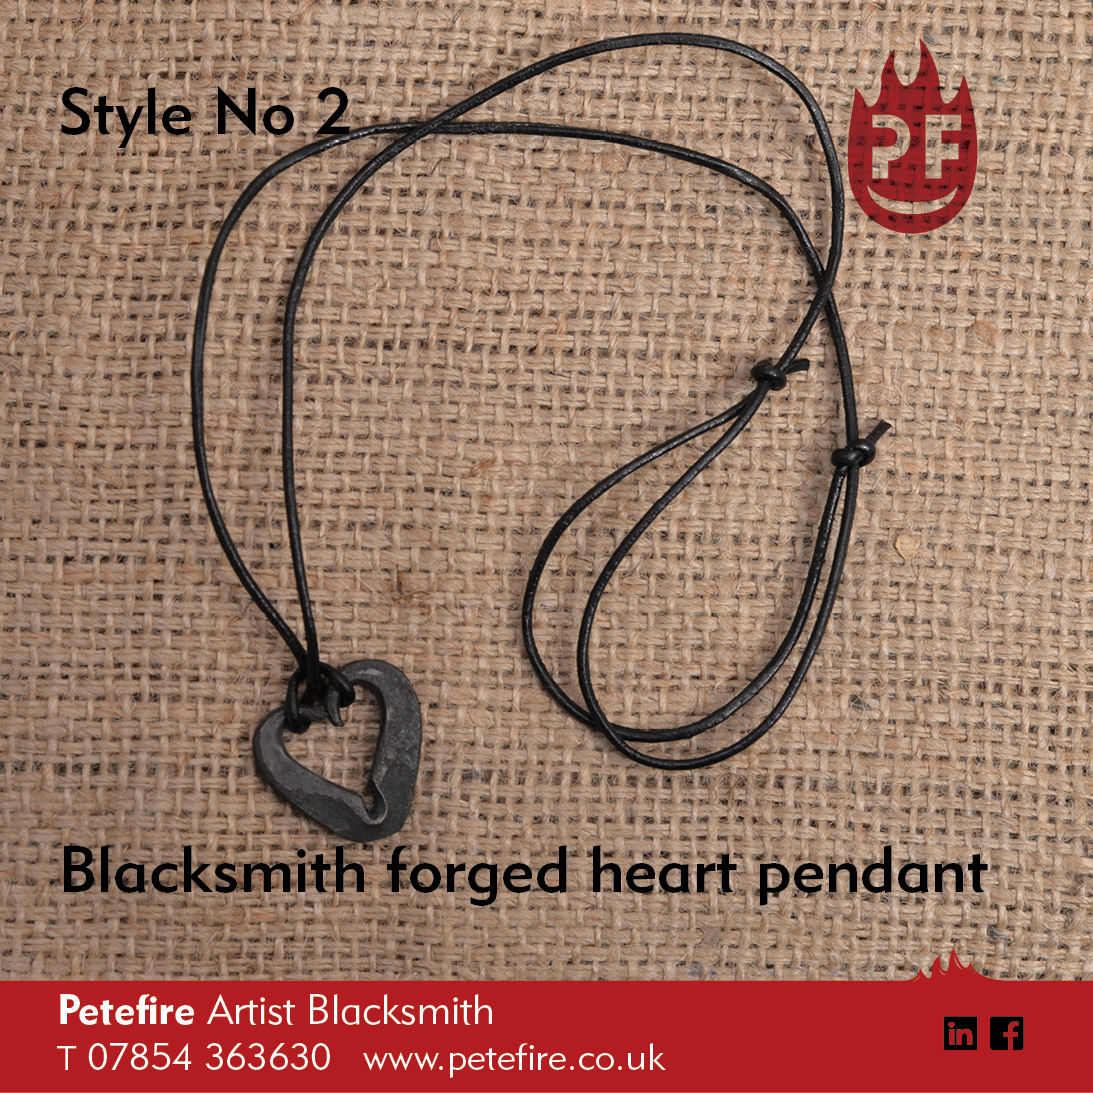 blacksmith forged heart pendant from Petefire